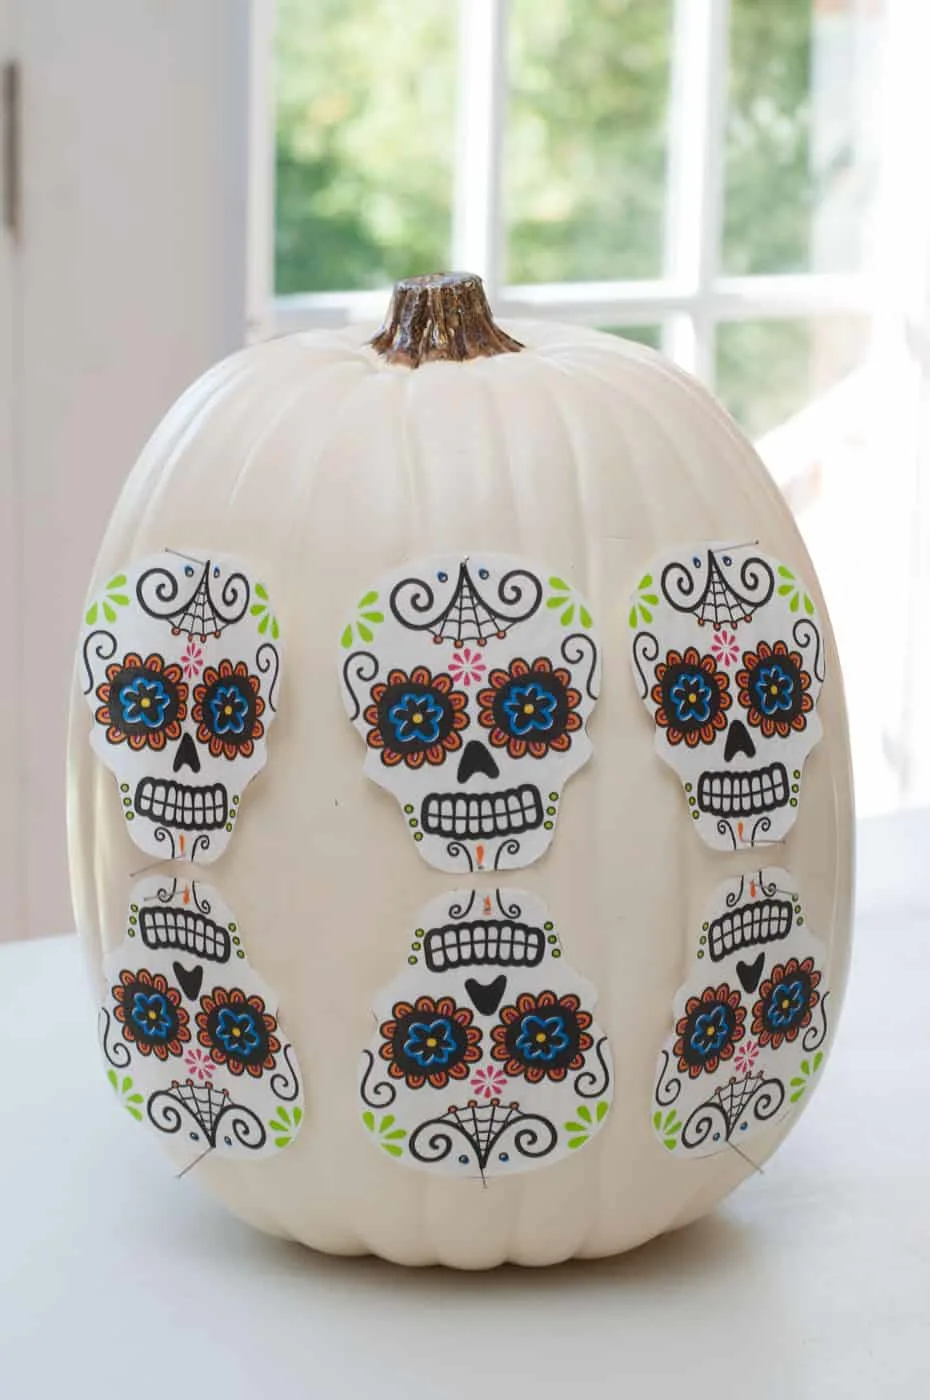 Sugar skull napkin shapes pinned onto the side of the pumpkin